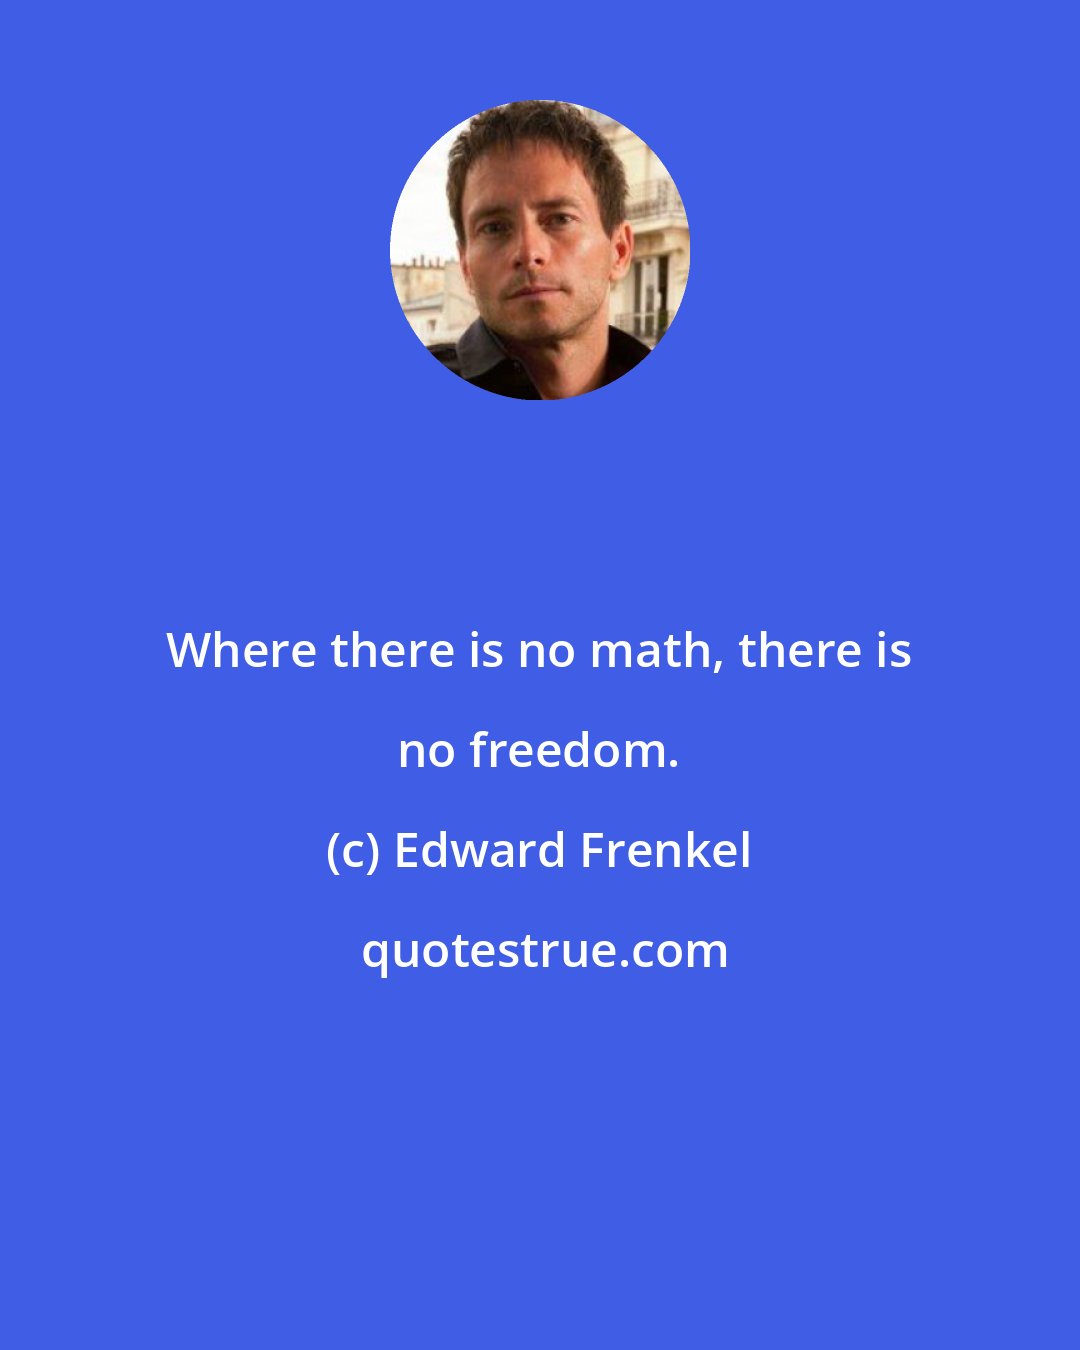 Edward Frenkel: Where there is no math, there is no freedom.